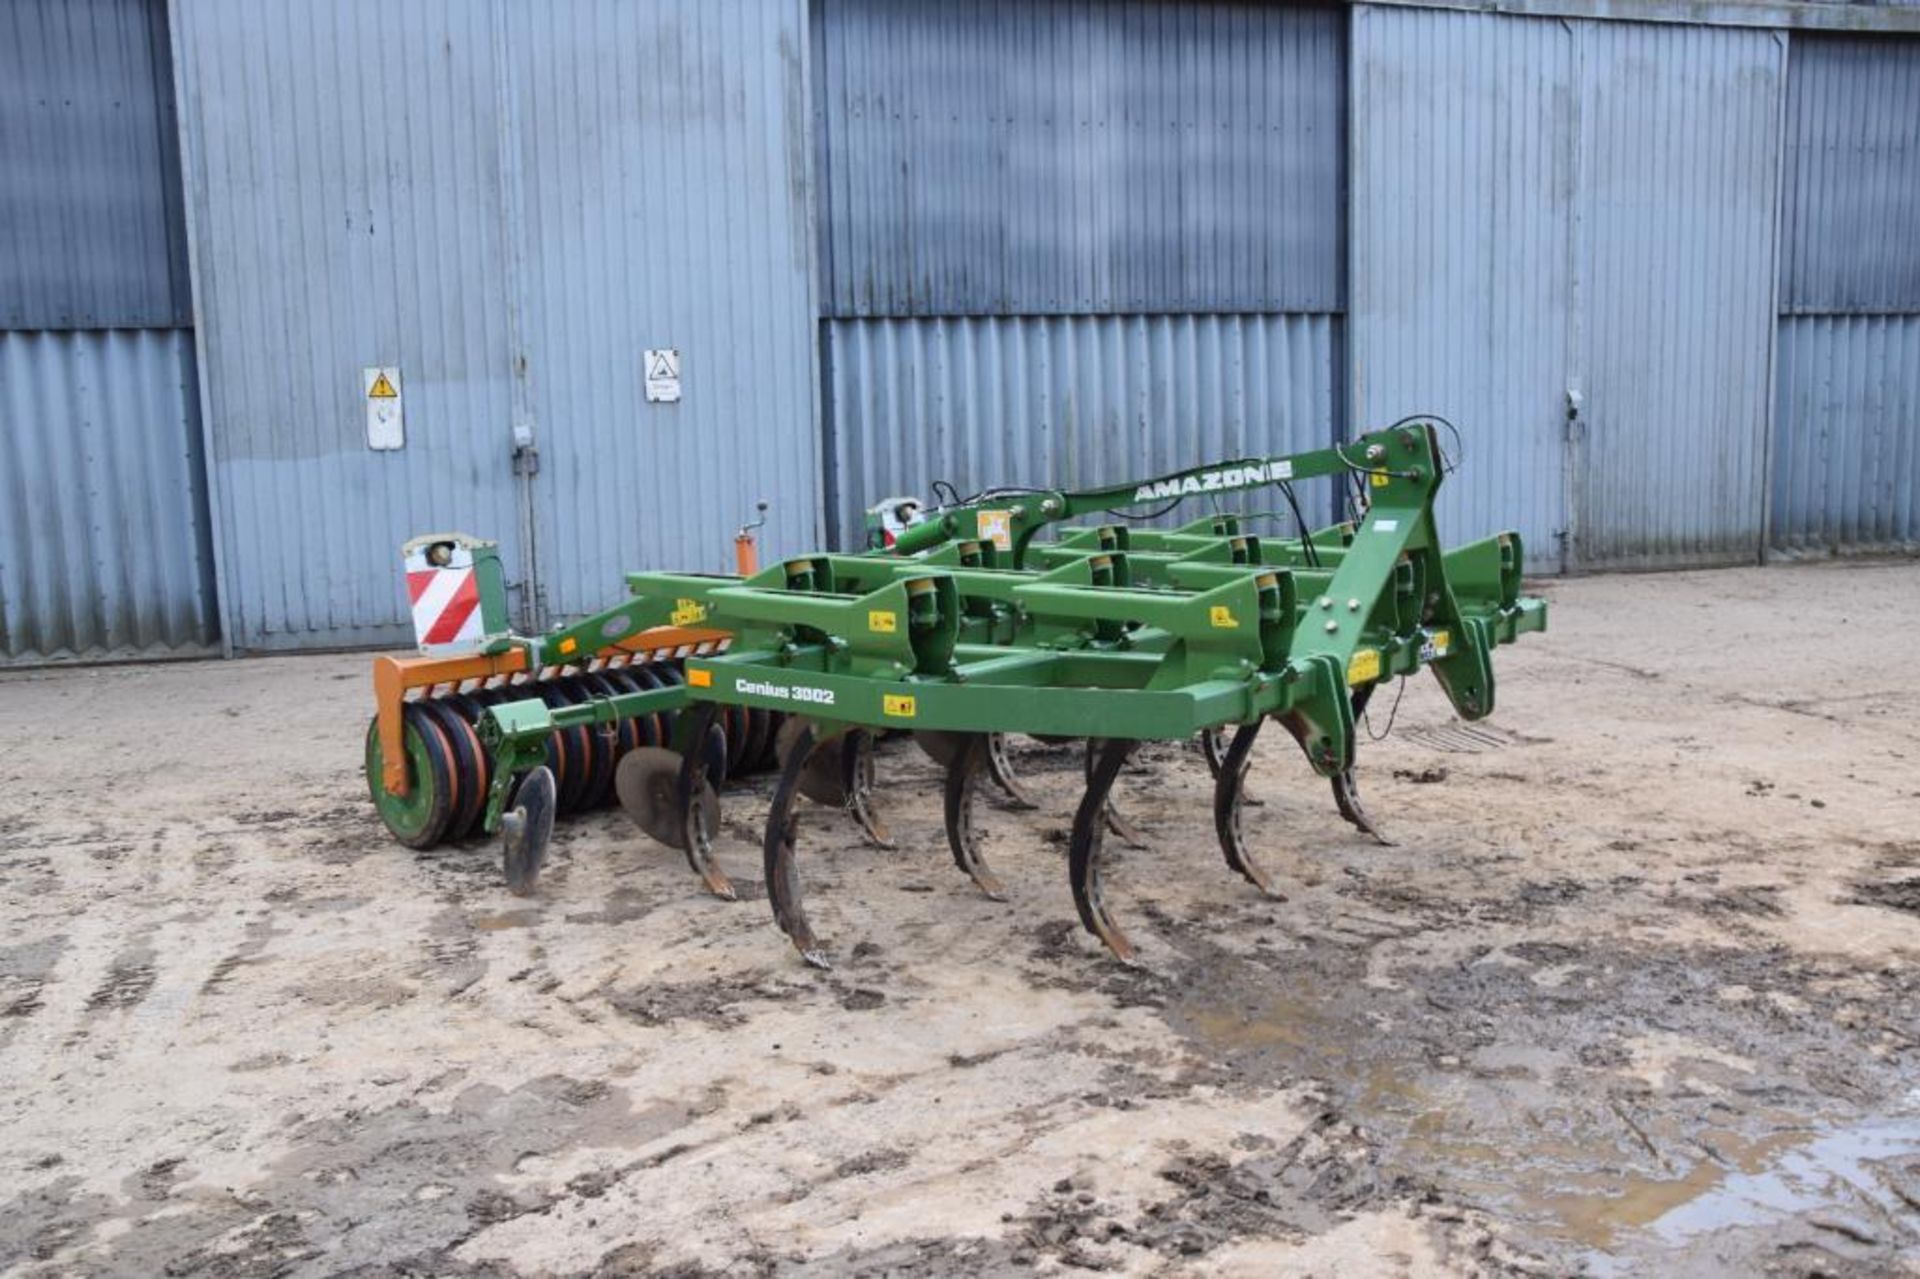 2012 Amazone Cenius 3002 3m cultivator with tines, discs and packer. Serial No: CXS0001513. Manual i - Image 7 of 17